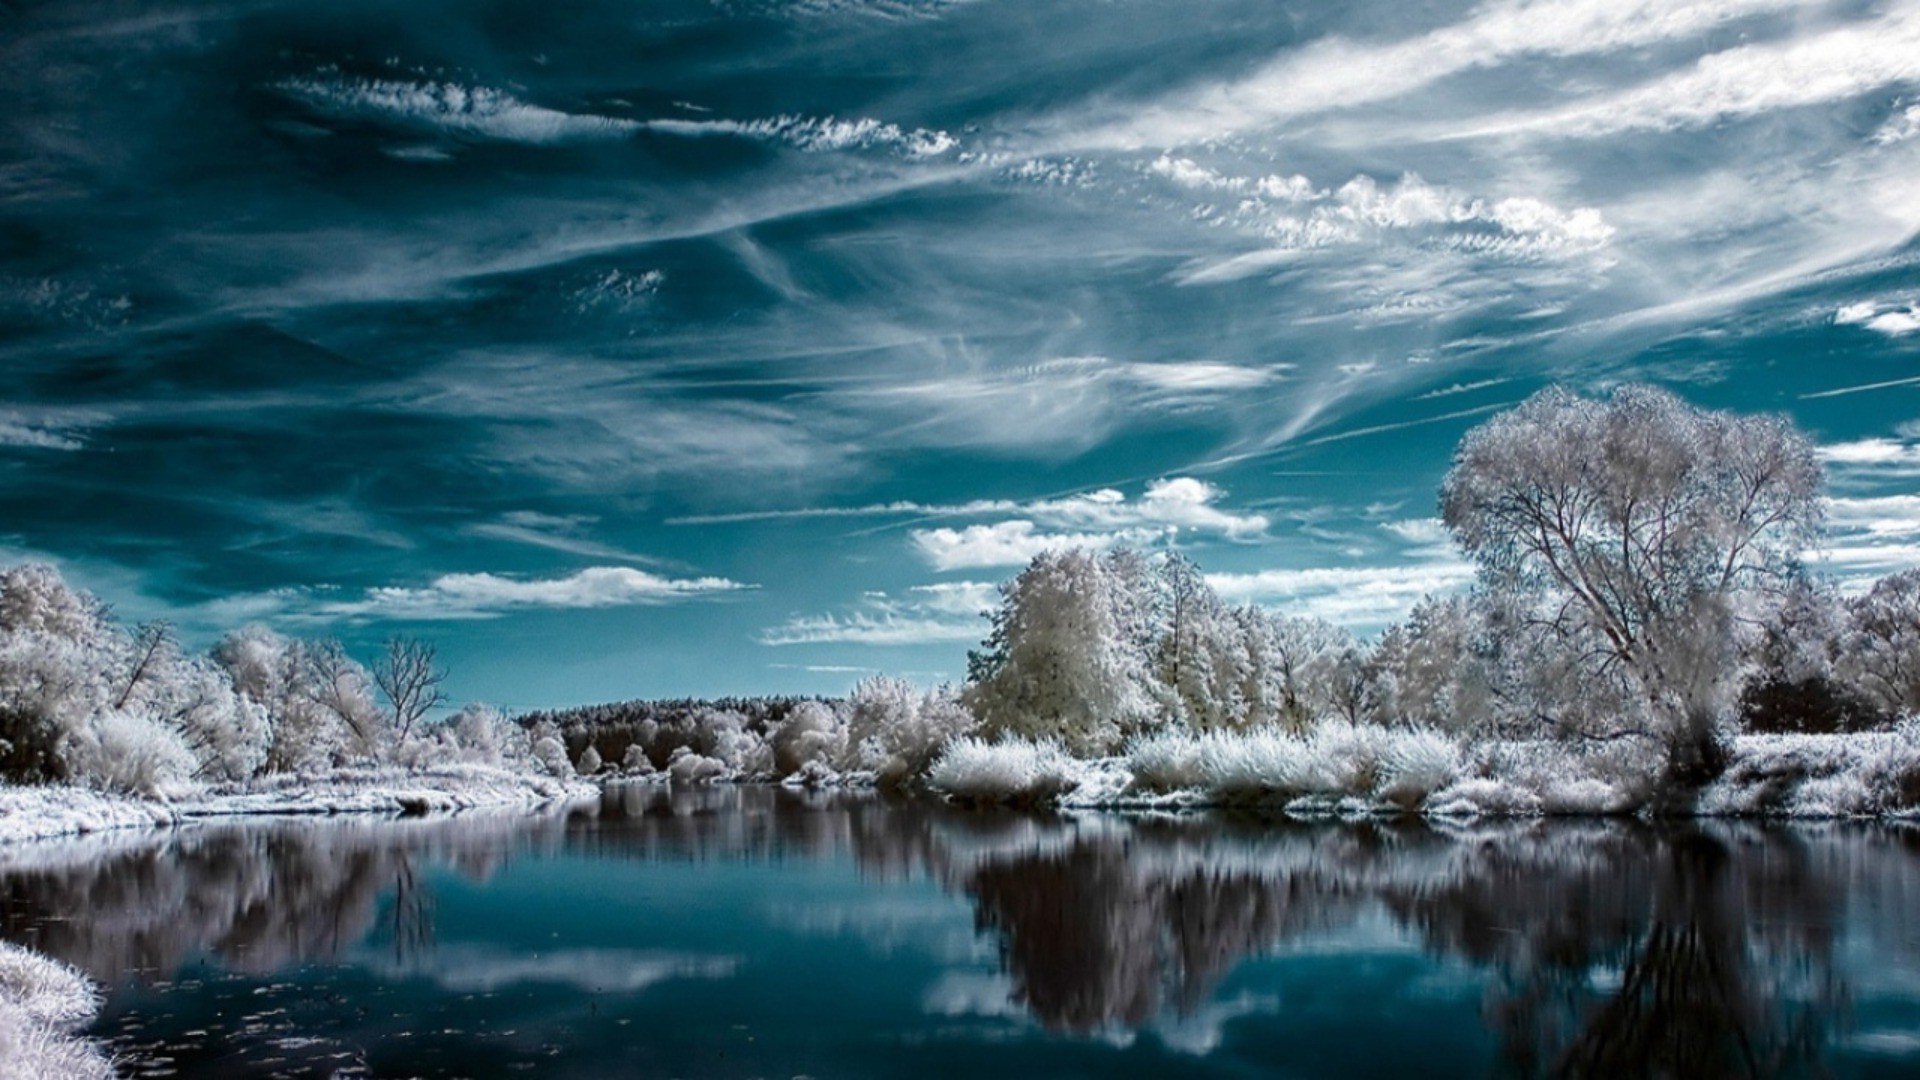 winter water sky nature travel sea outdoors landscape ocean reflection